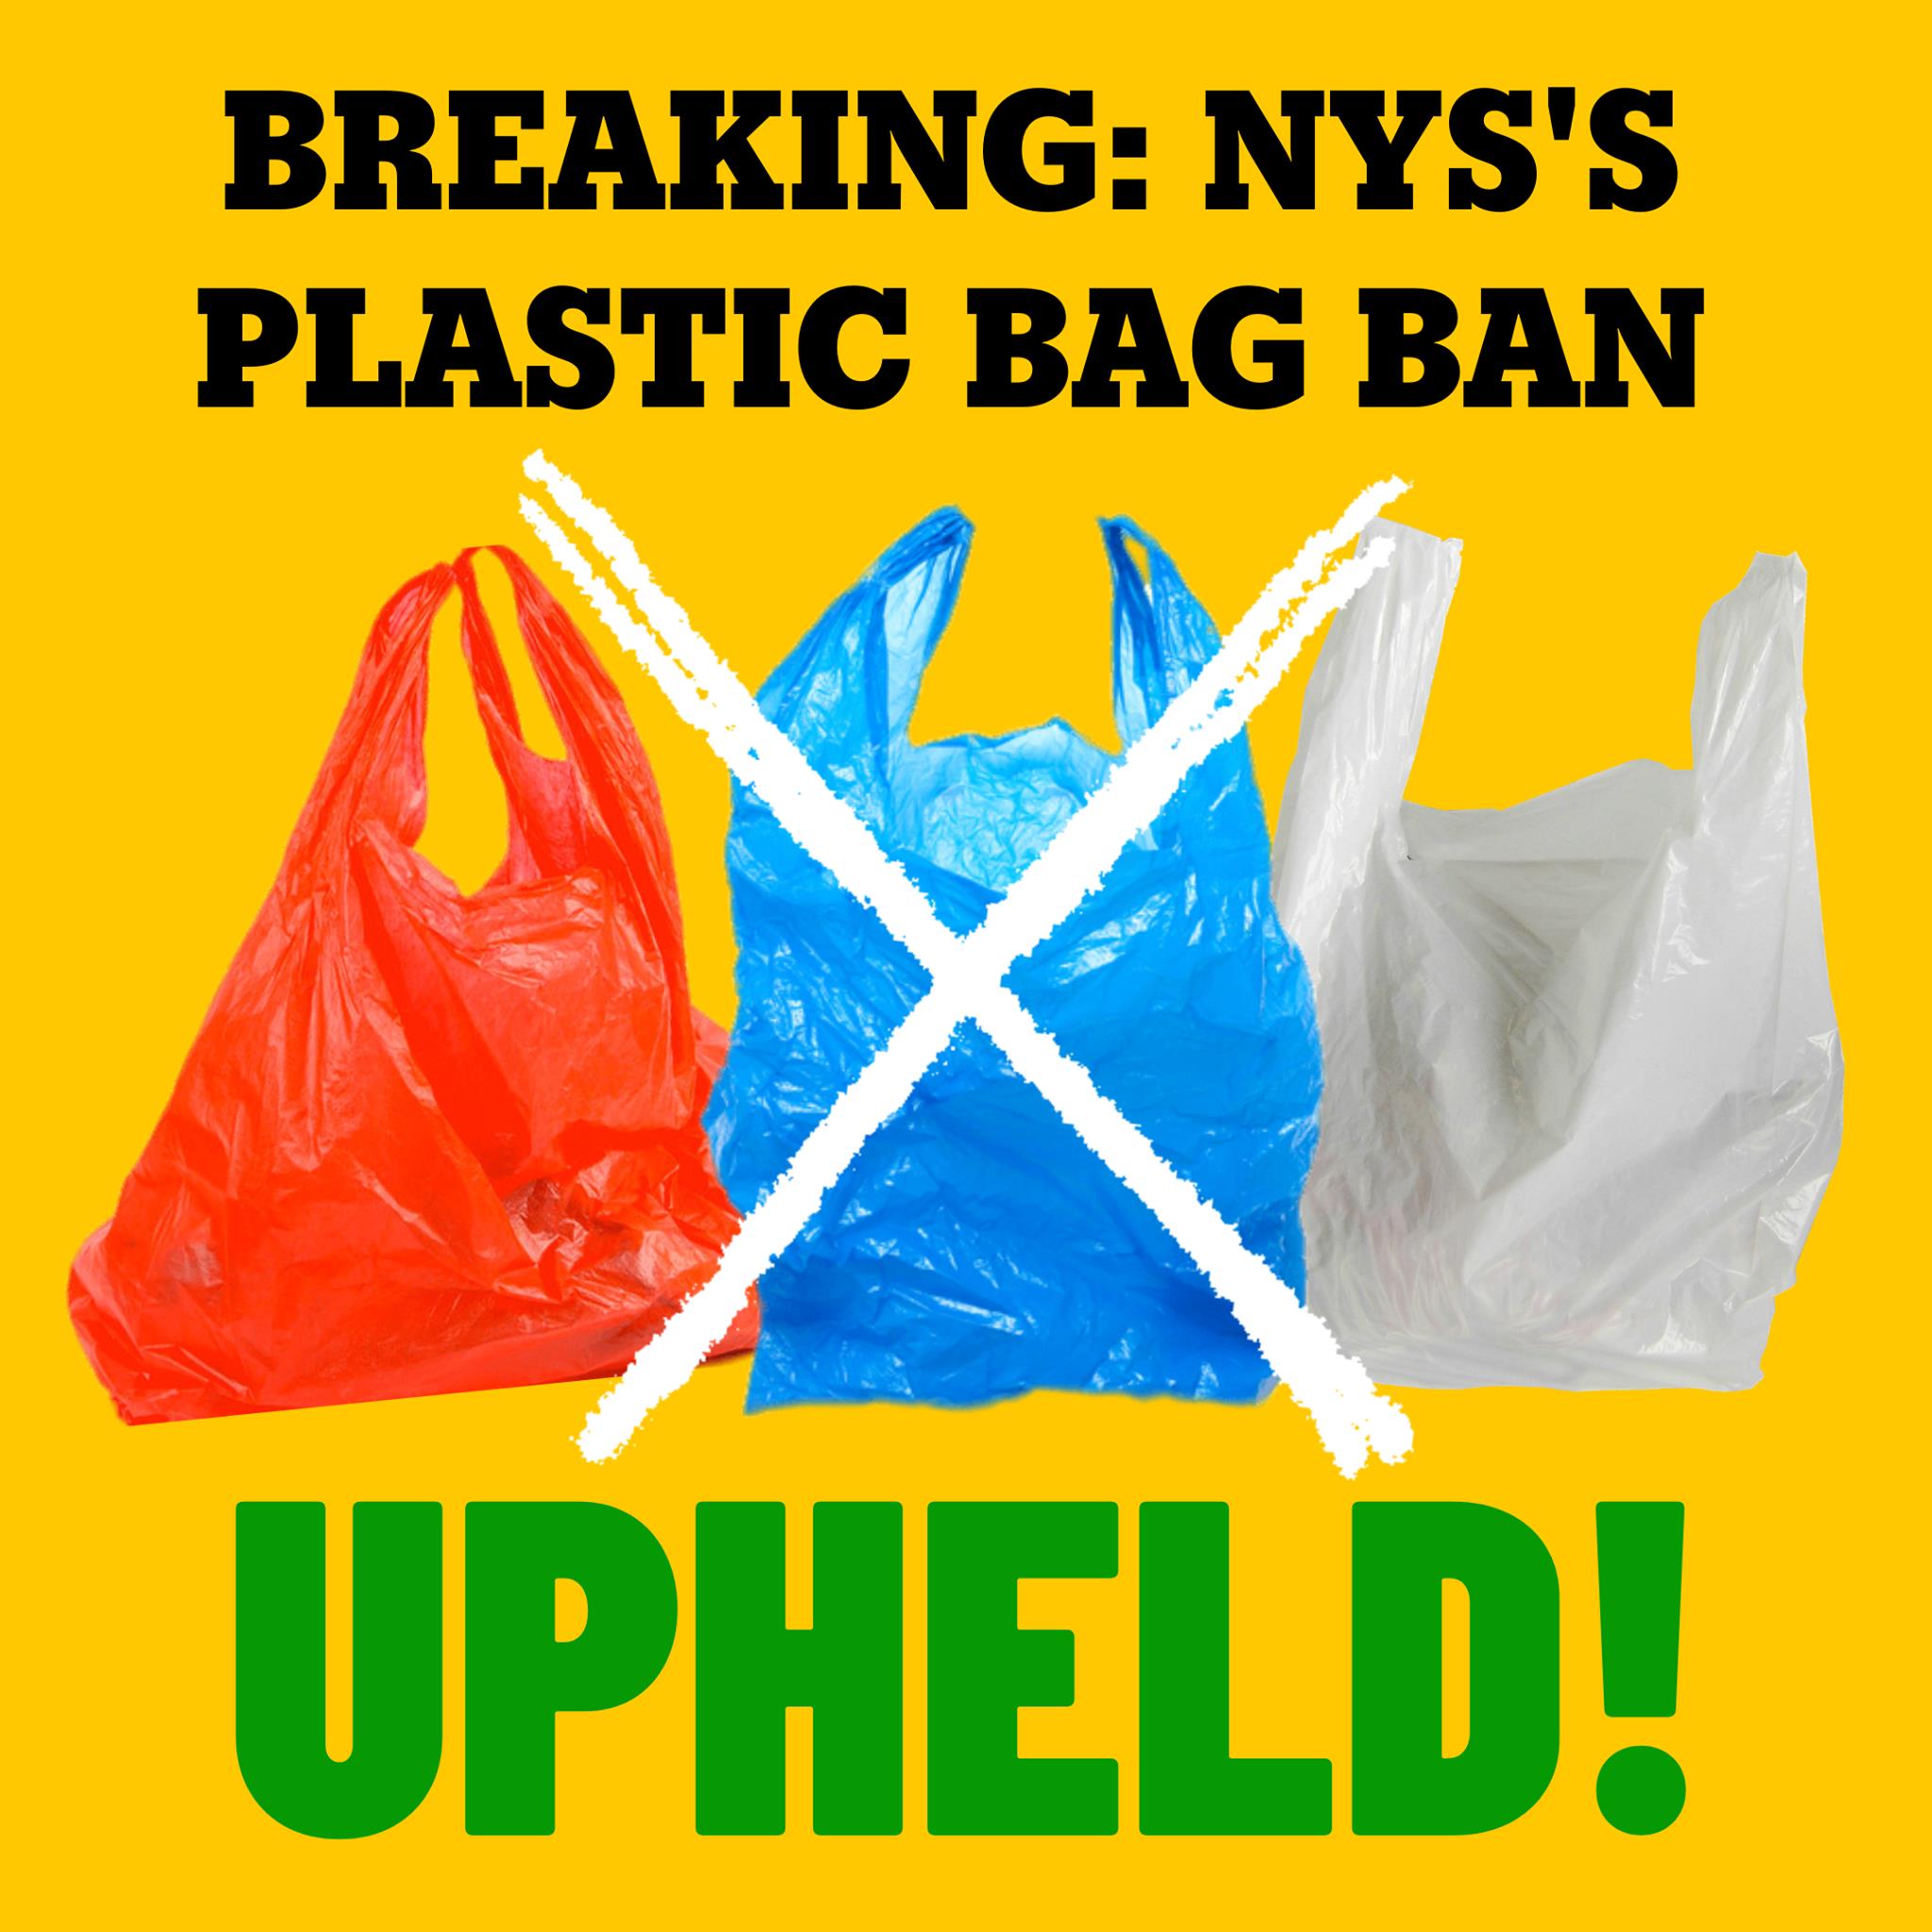 Nys Plastic Bag Ban Goes Into Effect Monday October 19th The Sanctuary For Independent Media